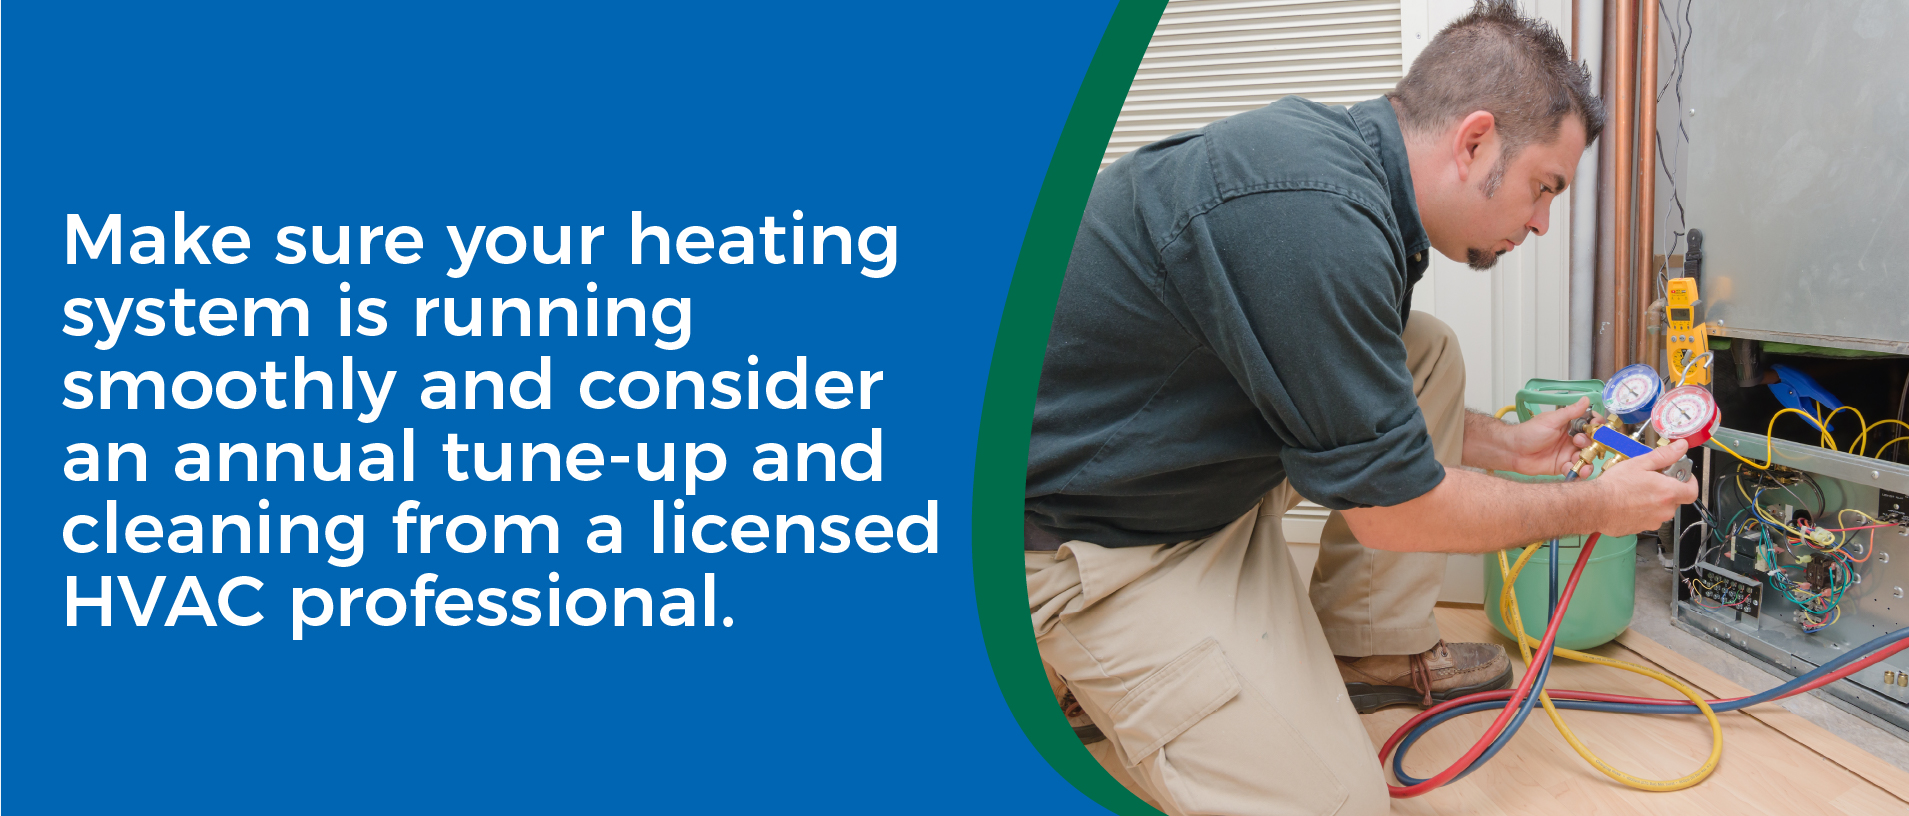 Make sure your heating system is running smoothly and consider an annual tune-up from an HVAC professional - HVAC pro checking a heating system